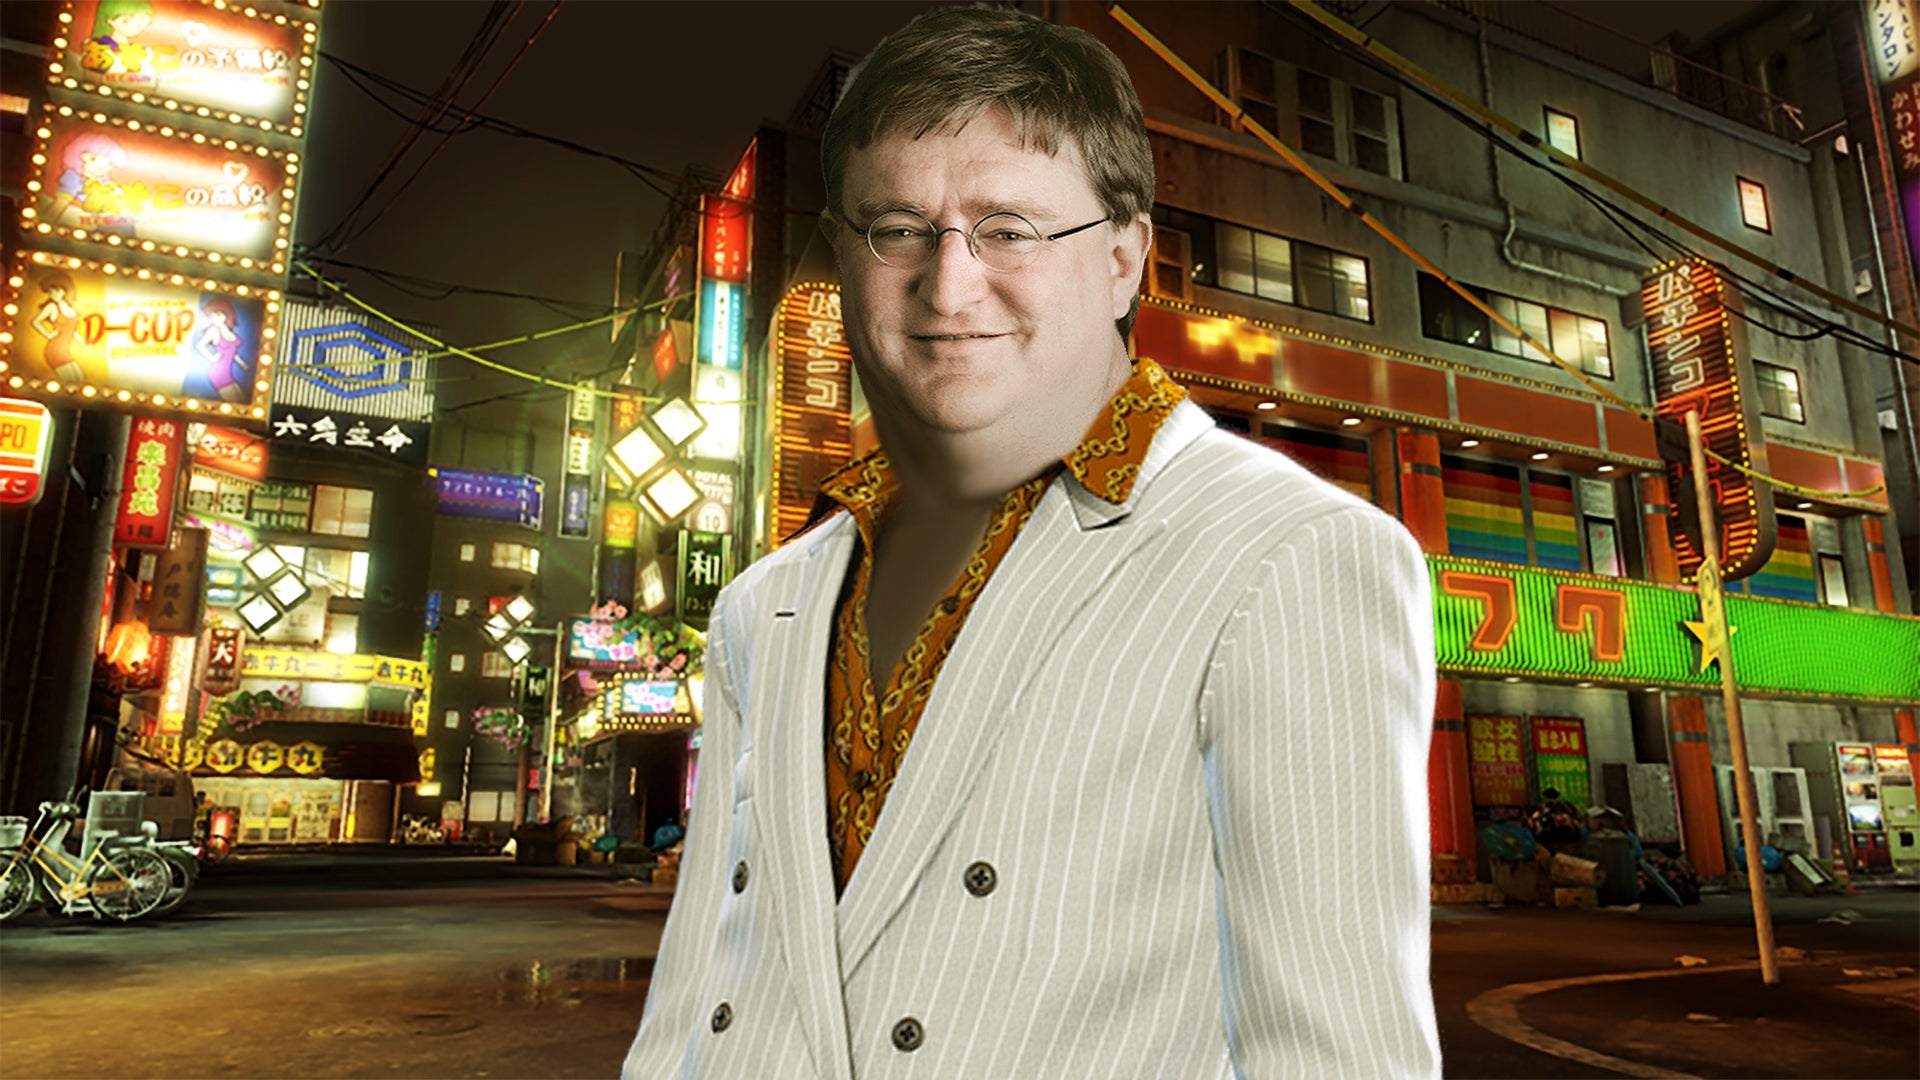 Kazuma Kiryu from Yakuza 0 standing in front of a few shops in Kamurocho at night, but he has the face of Gabe Newell.